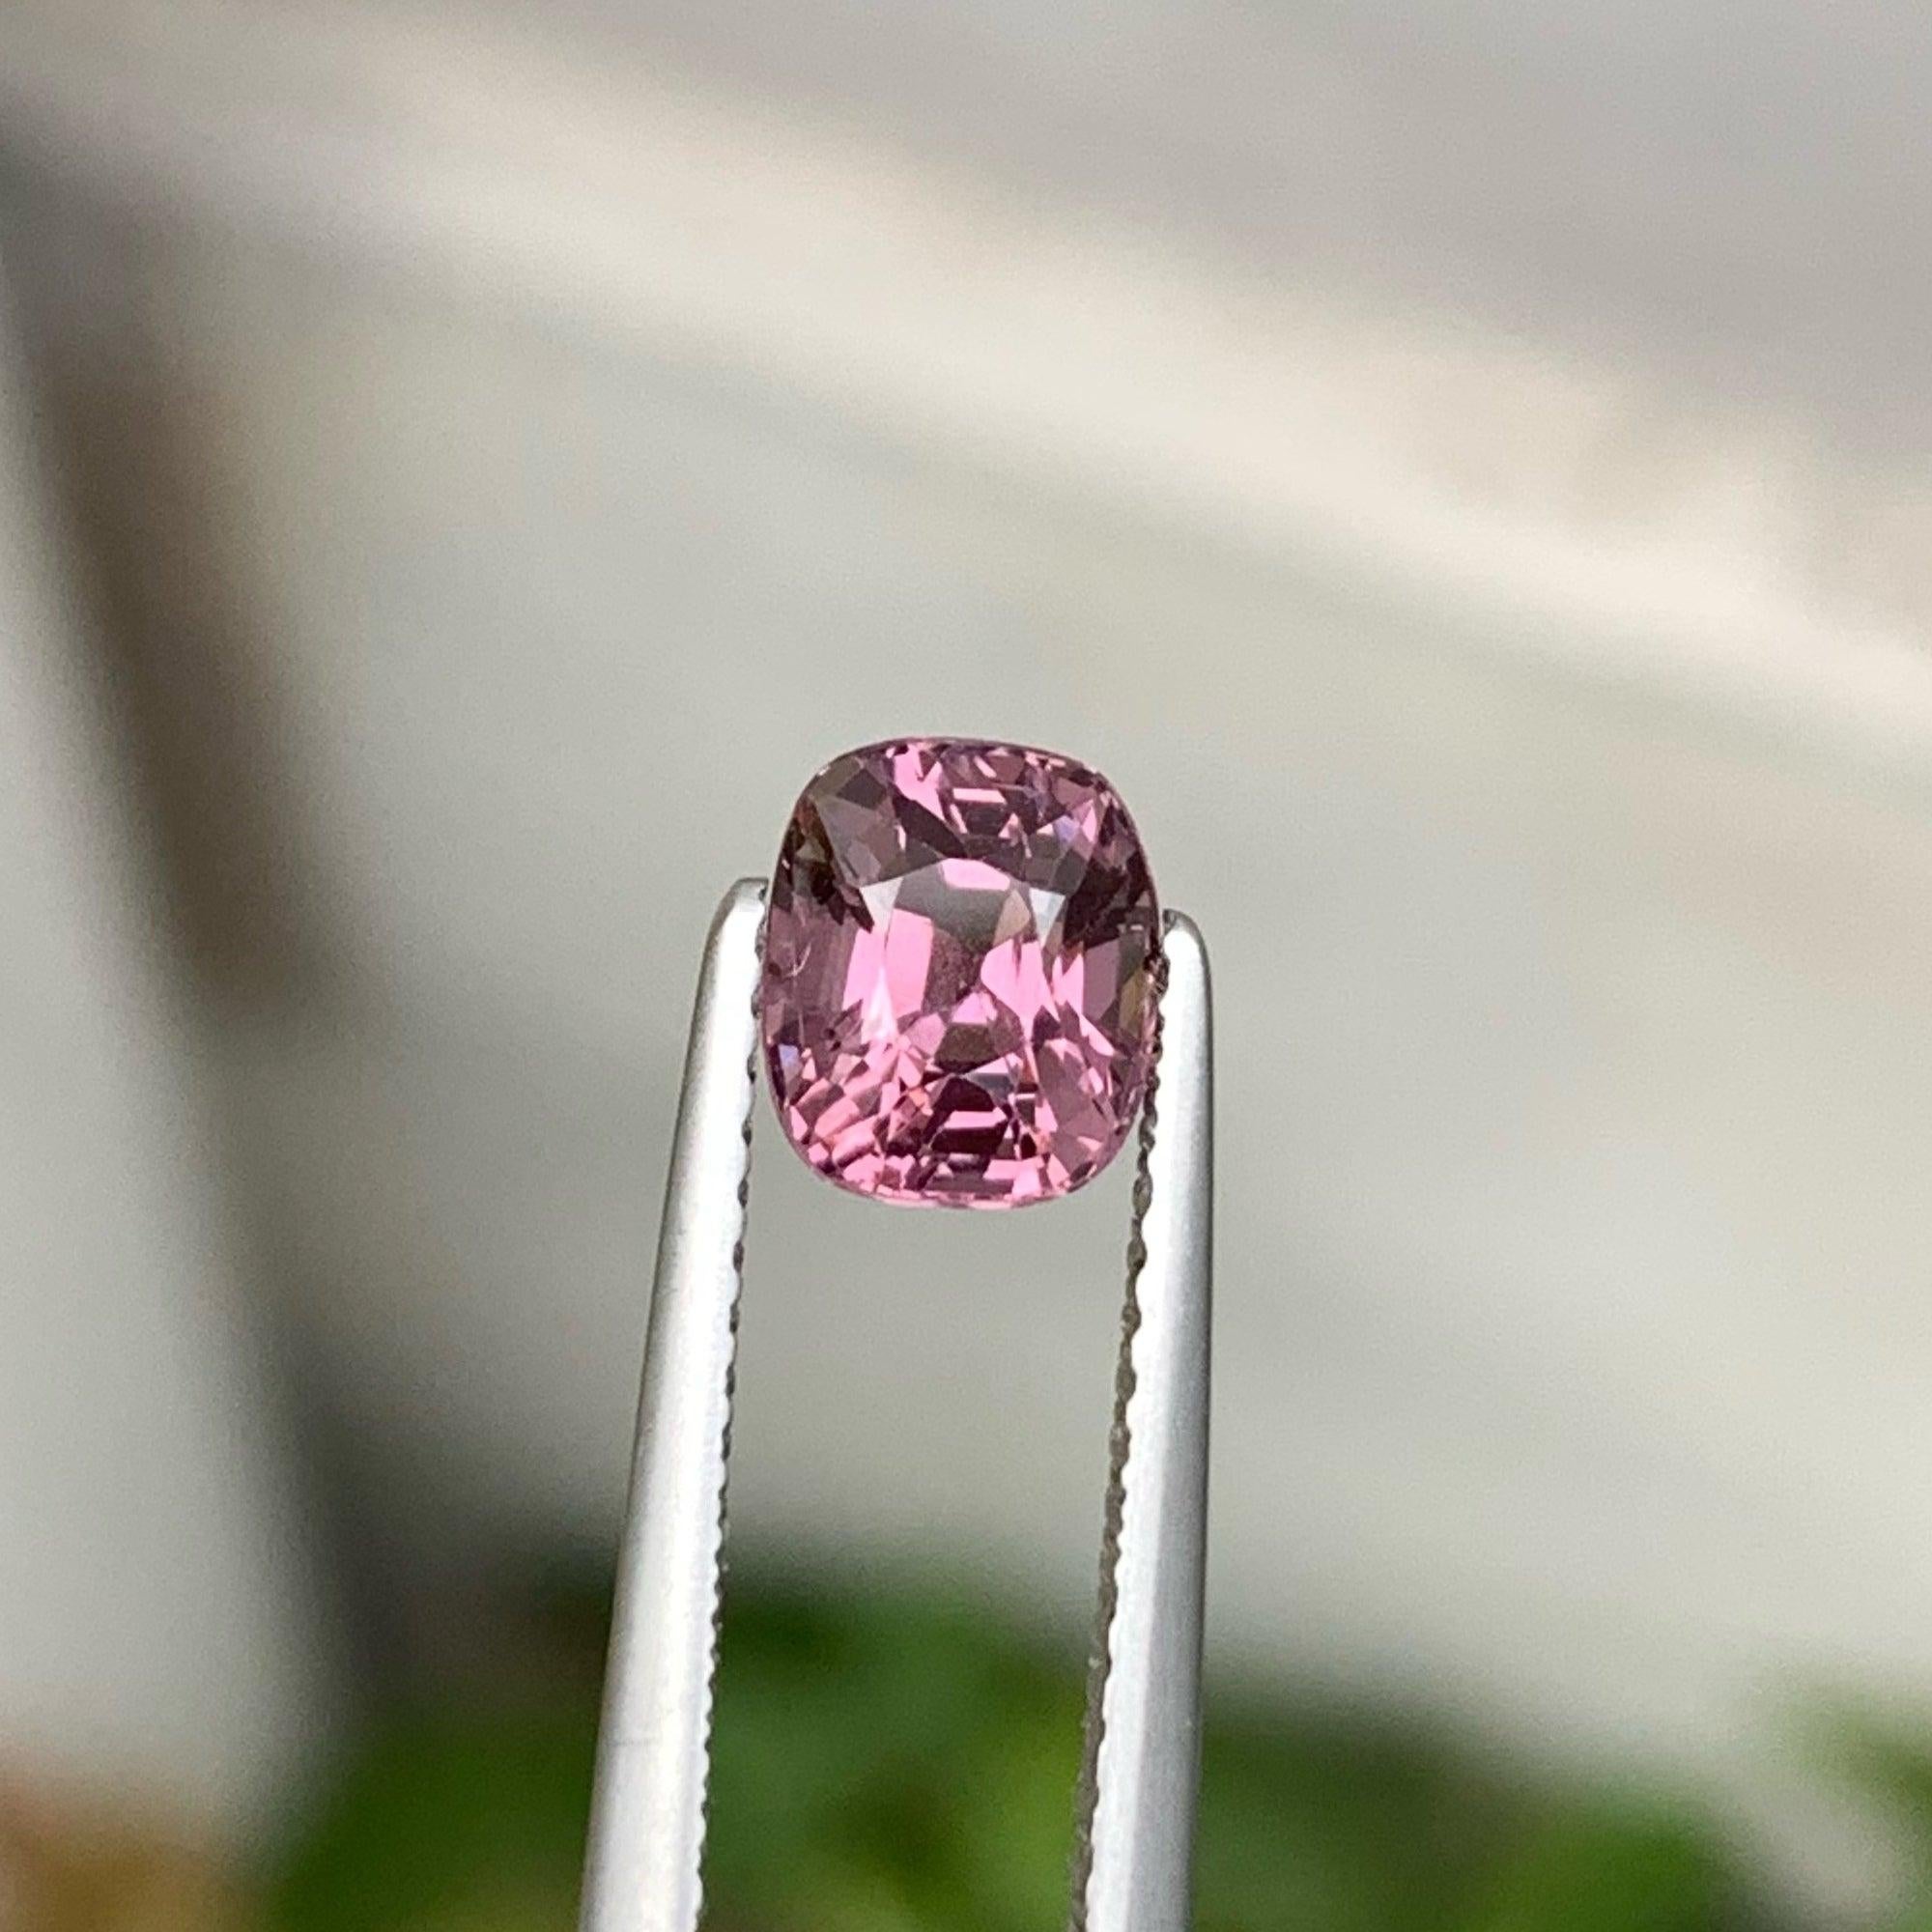 Cushion Cut Brilliant Cut Natural Spinel Gemstone 1.25 Carats Loose Spinel For Jewelry Use For Sale